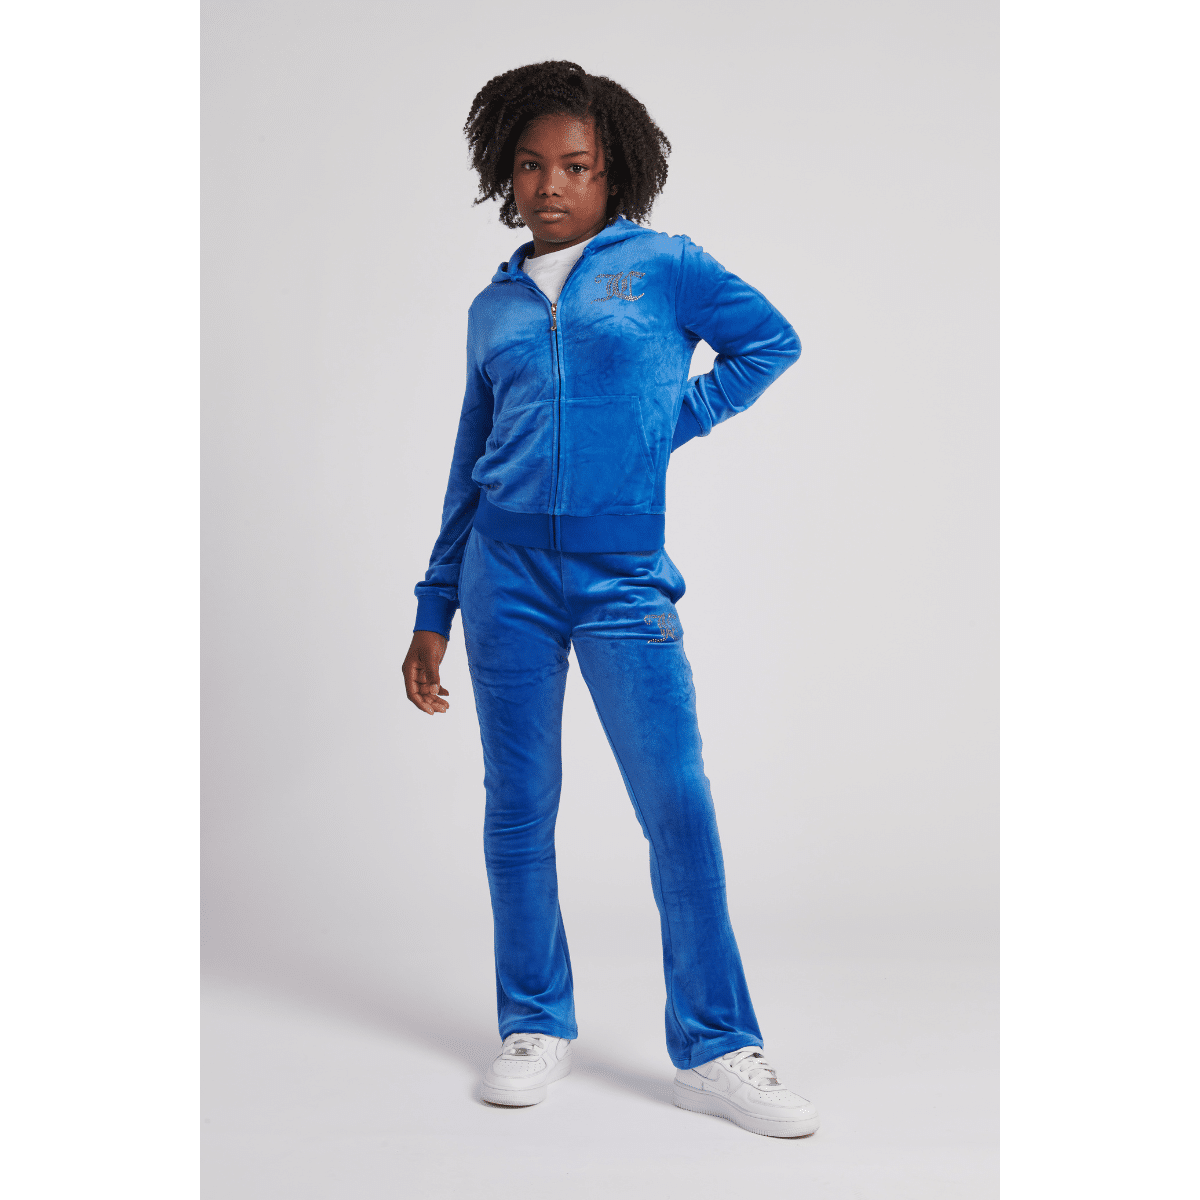 juicy couture girls blue velour tracksuit on model